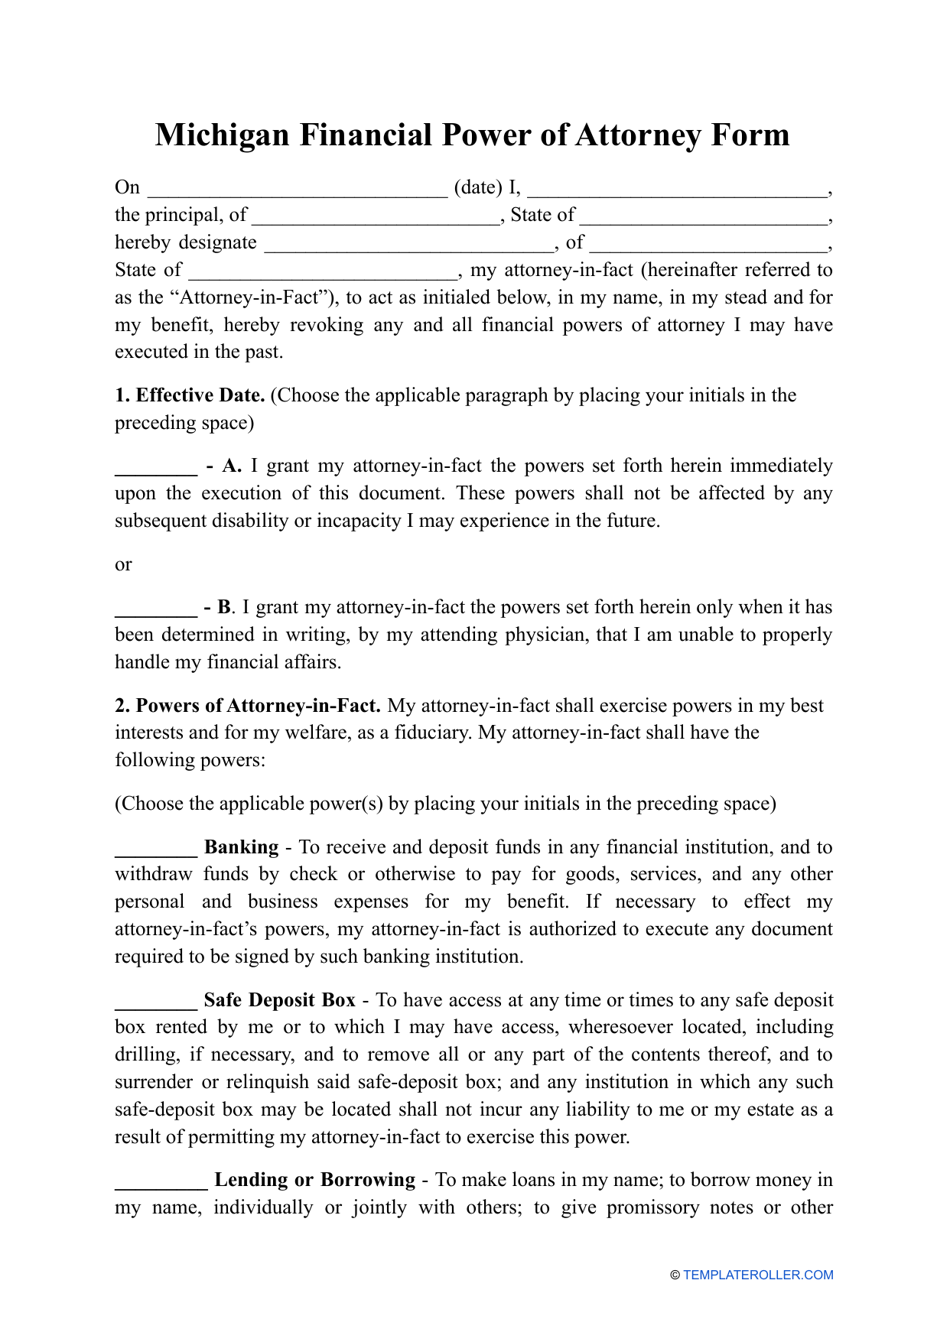 Financial Power of Attorney Form - Michigan, Page 1